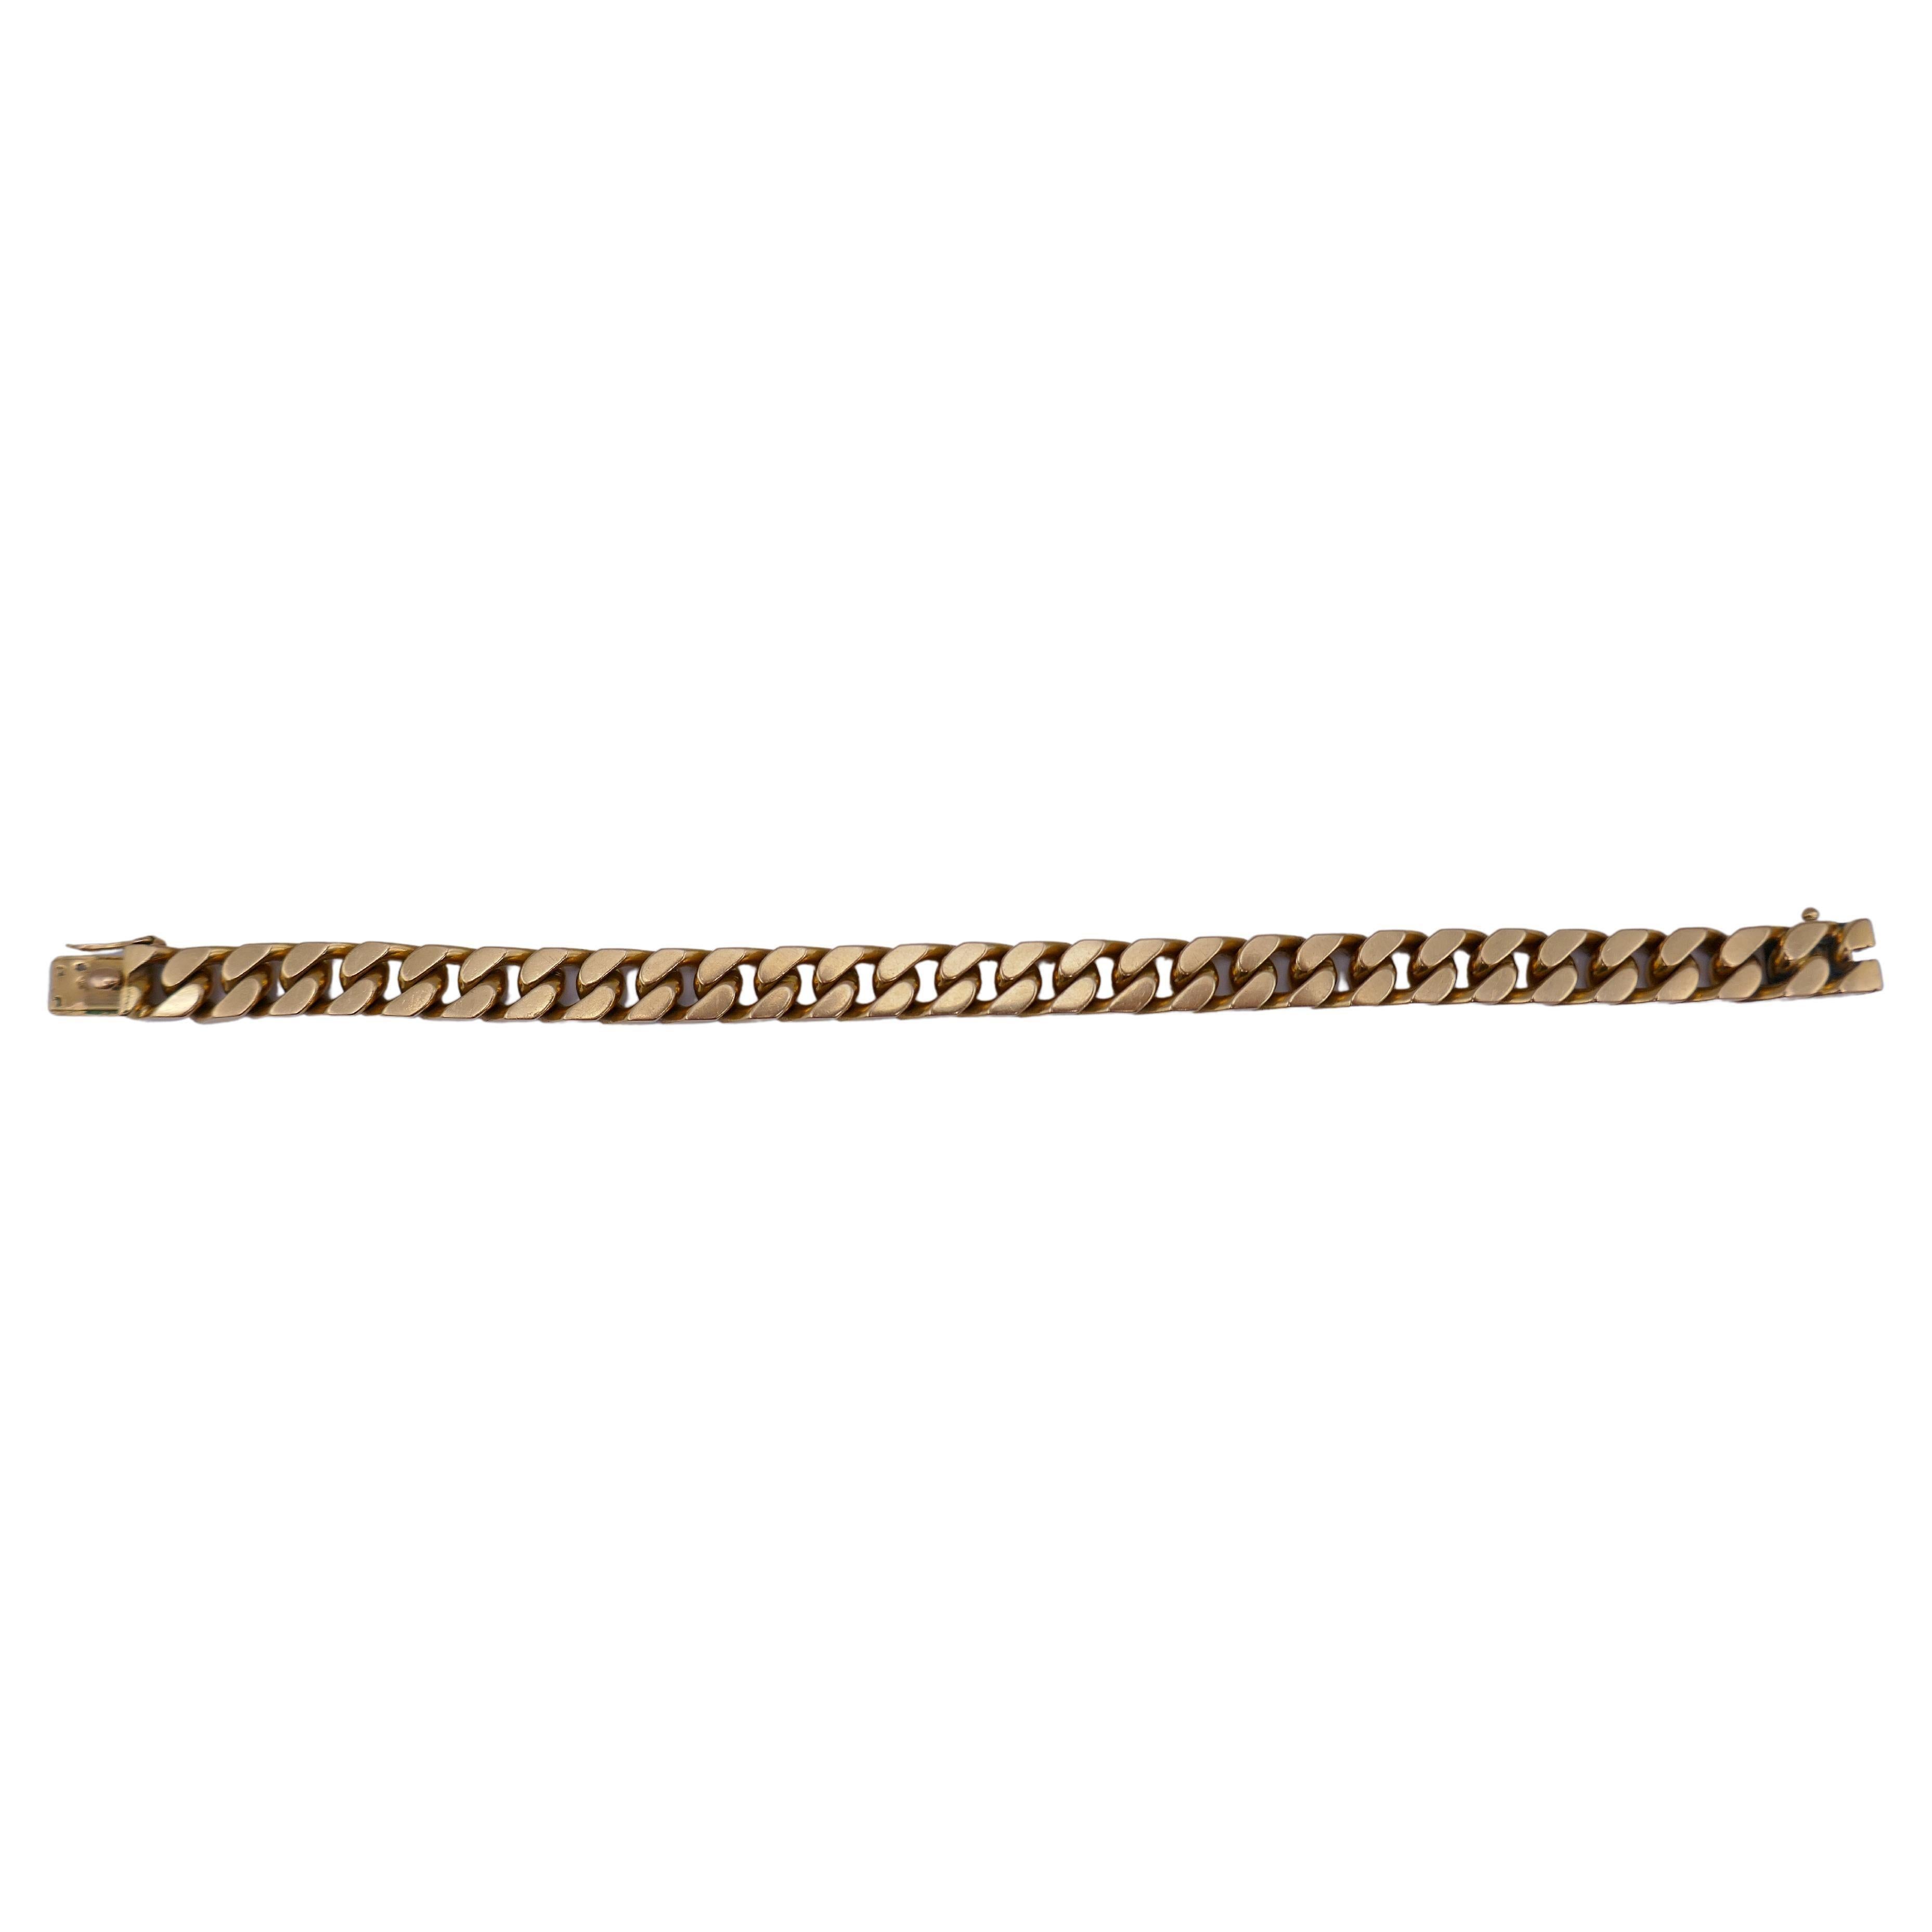 A perfect gold curb link chain bracelet by Boucheron. 
The bracelet is made of 18k gold and has a great color. Thick yet flat, this gold chain bracelet is great for wearing solo or as a part of a stack. 
The clasp stamped with Boucheron maker's